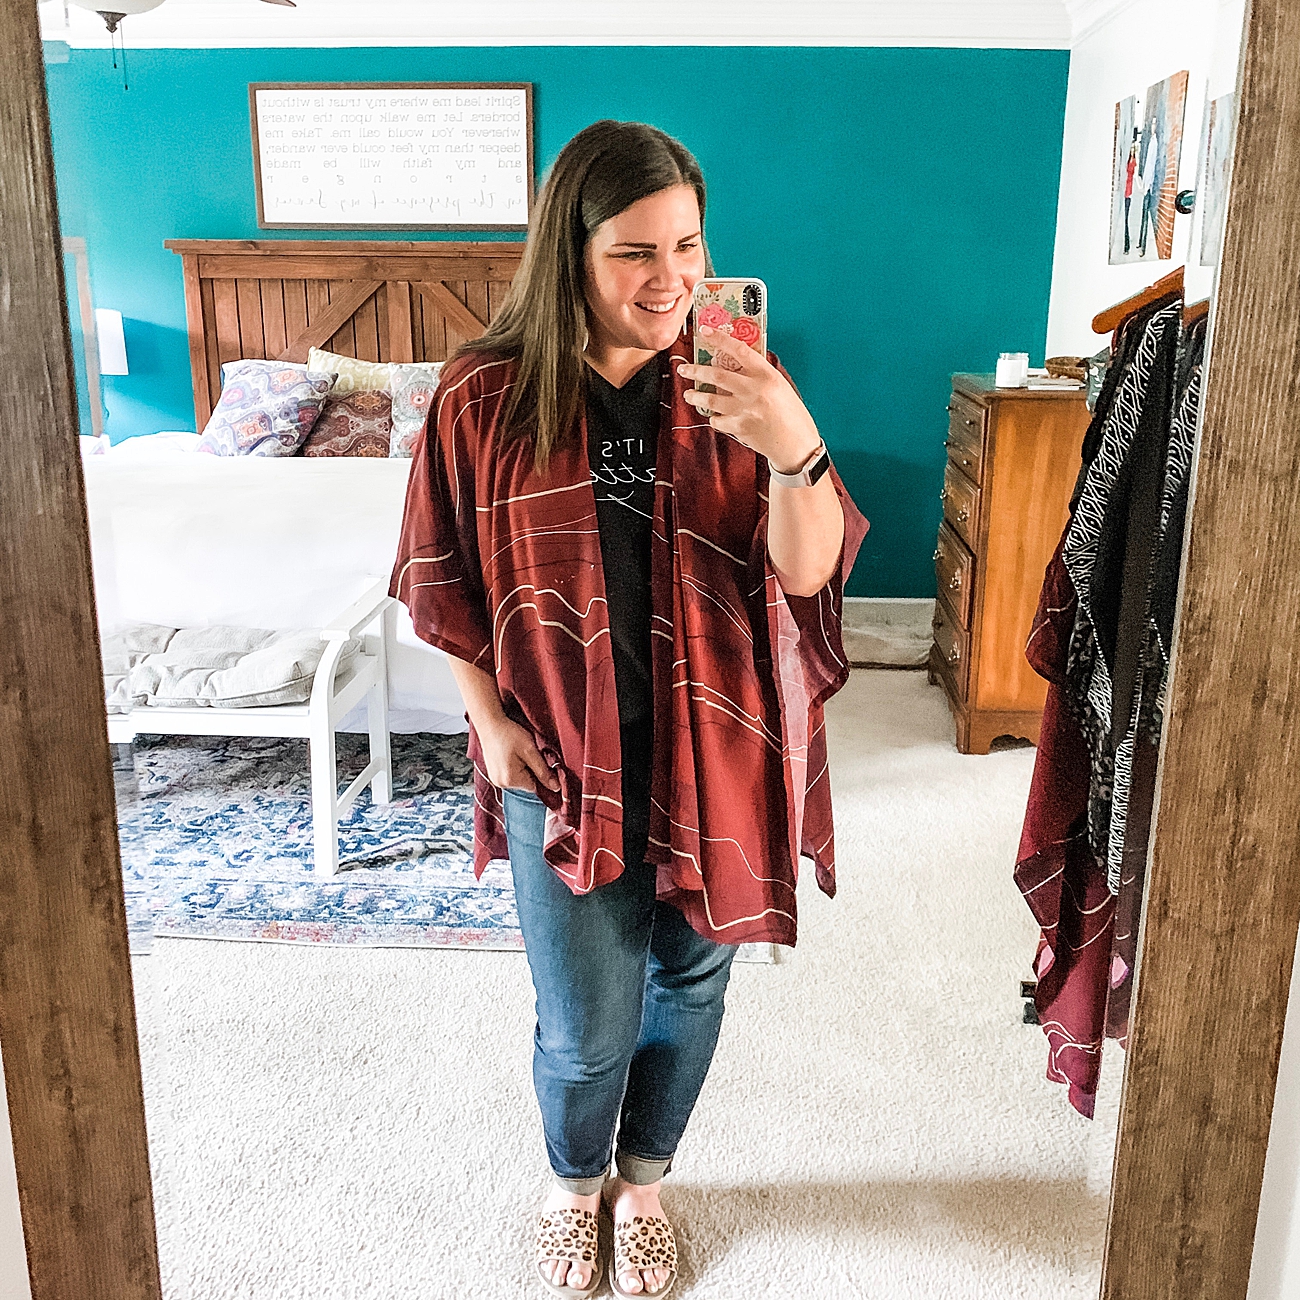 Sseko Designs Fall 2019 Sojourner Collection | Review + Try-On | Fair Trade Fashion #fairtradestyle #ethicalfashion http://www.ssekodesigns.com/mollystillman (16)